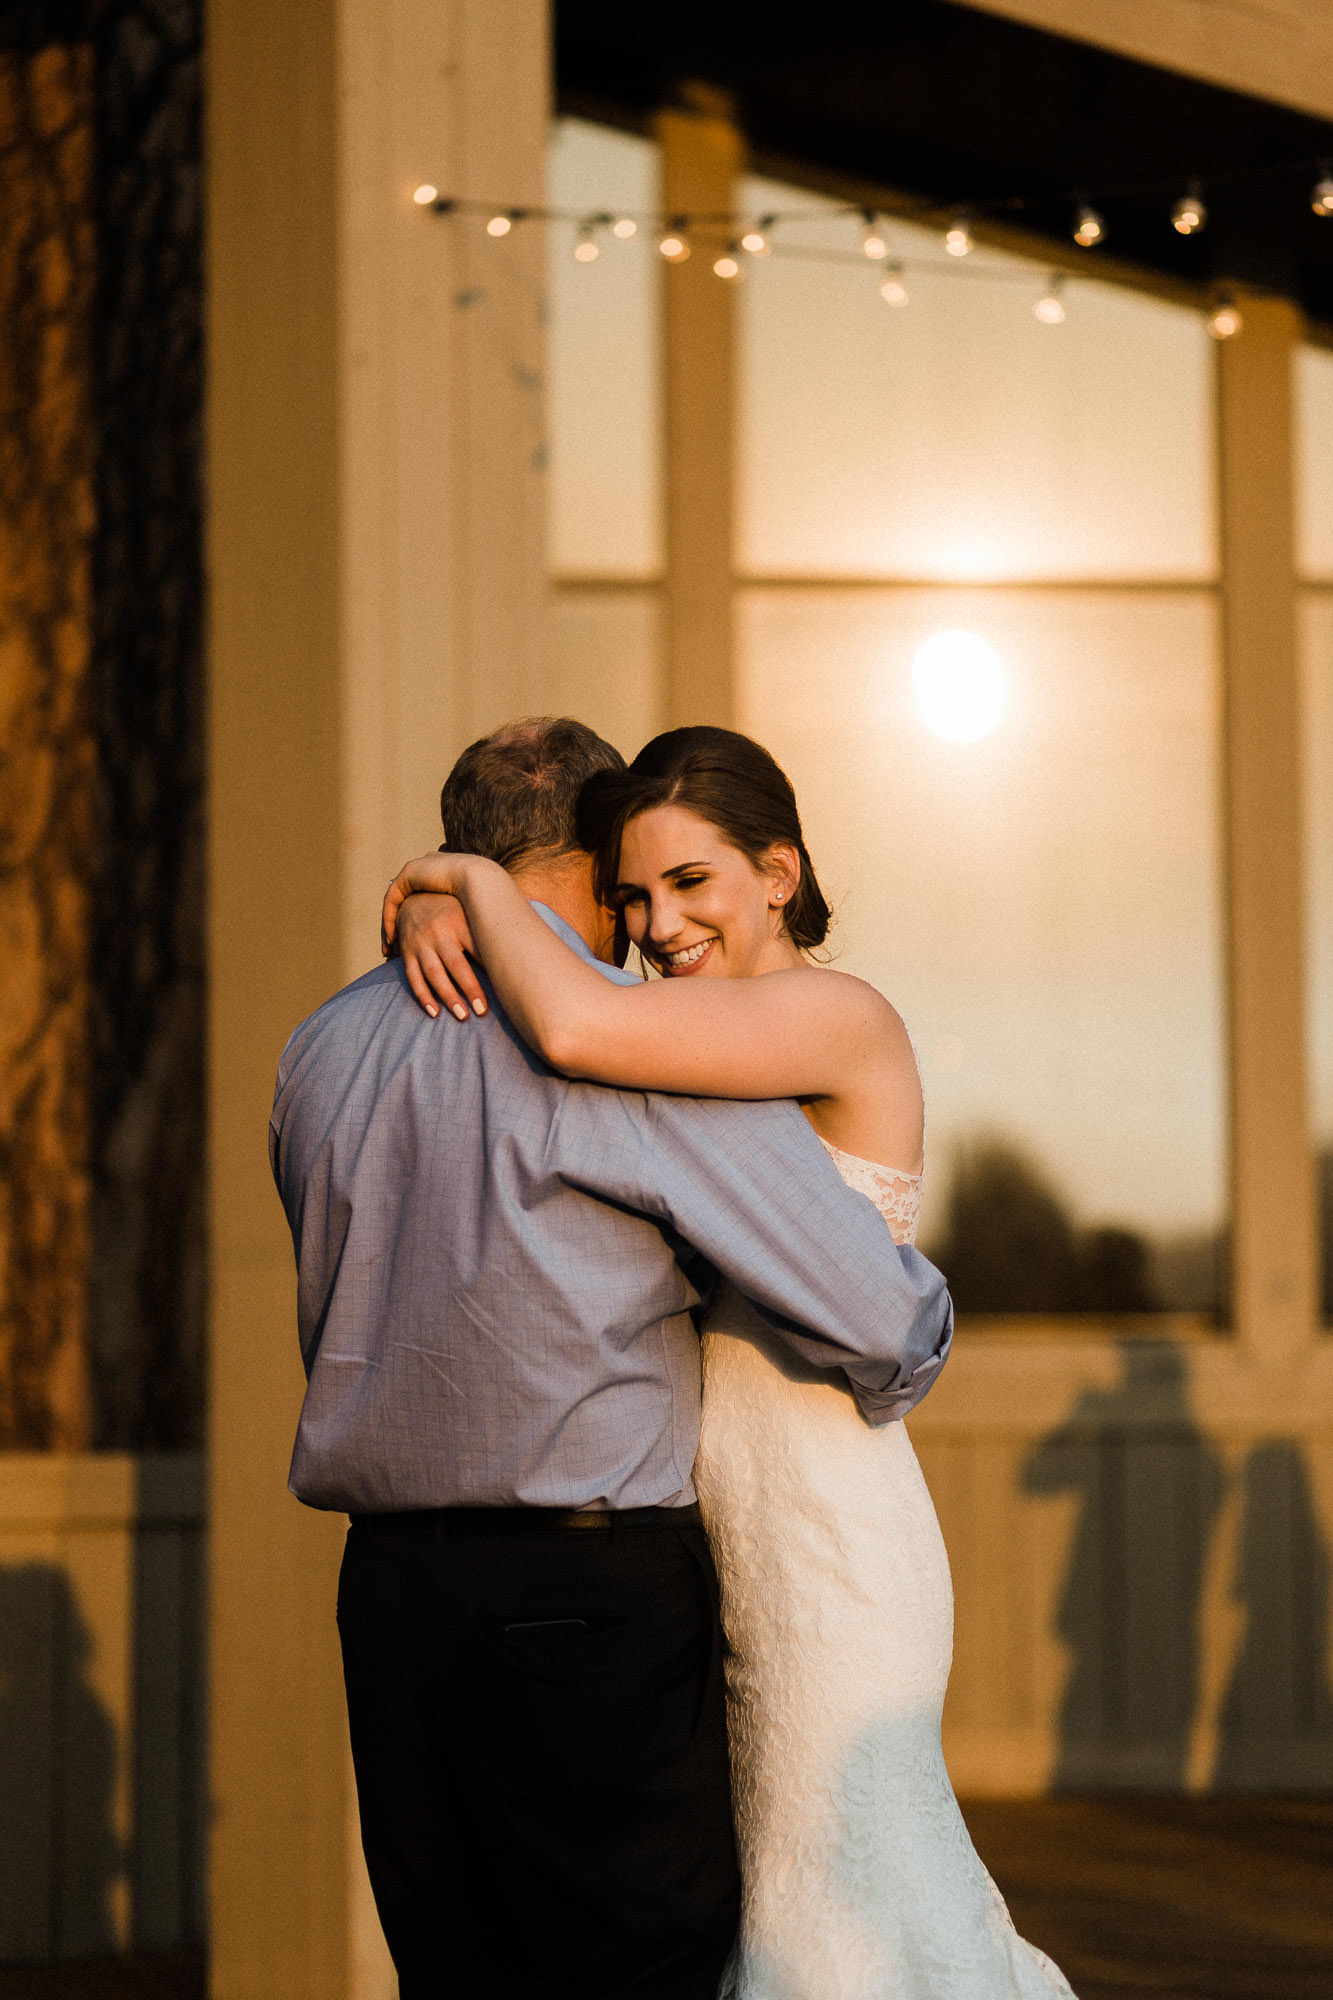 Bride and father dance during wedding reception at Black Butte Ranch